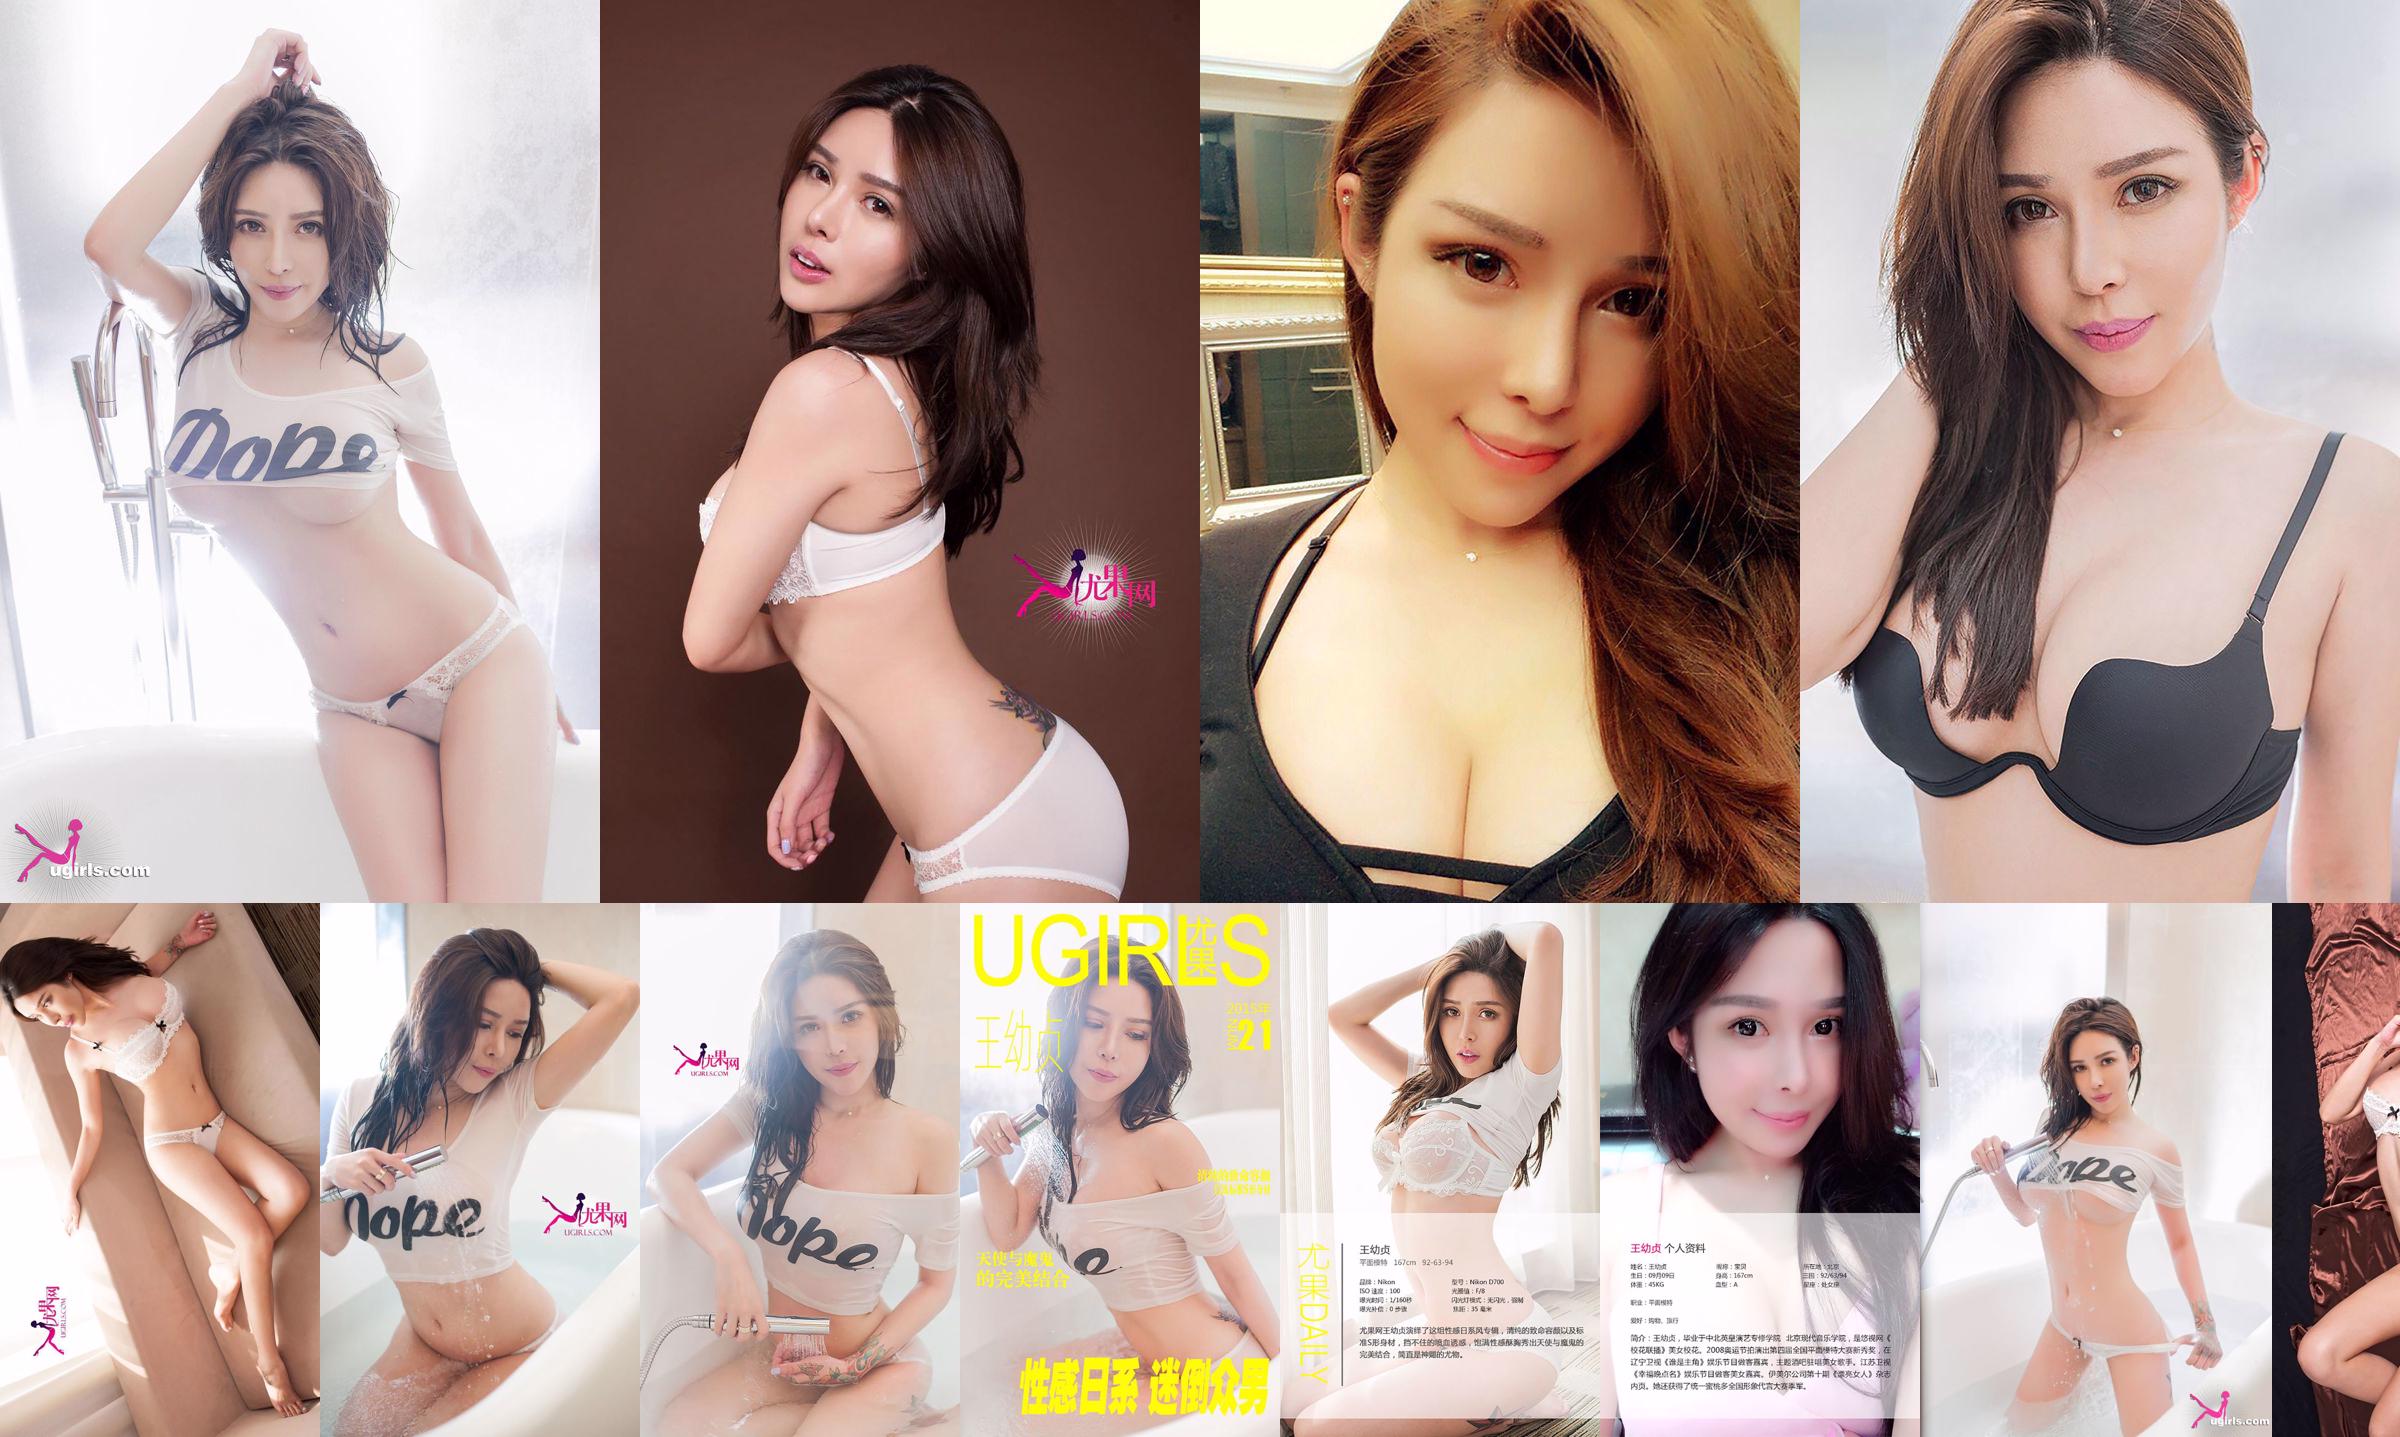 Wang Youzhen "The Stunner Gifted by God" [Love Stun Ugirls] No.226 No.6a7a00 Page 2